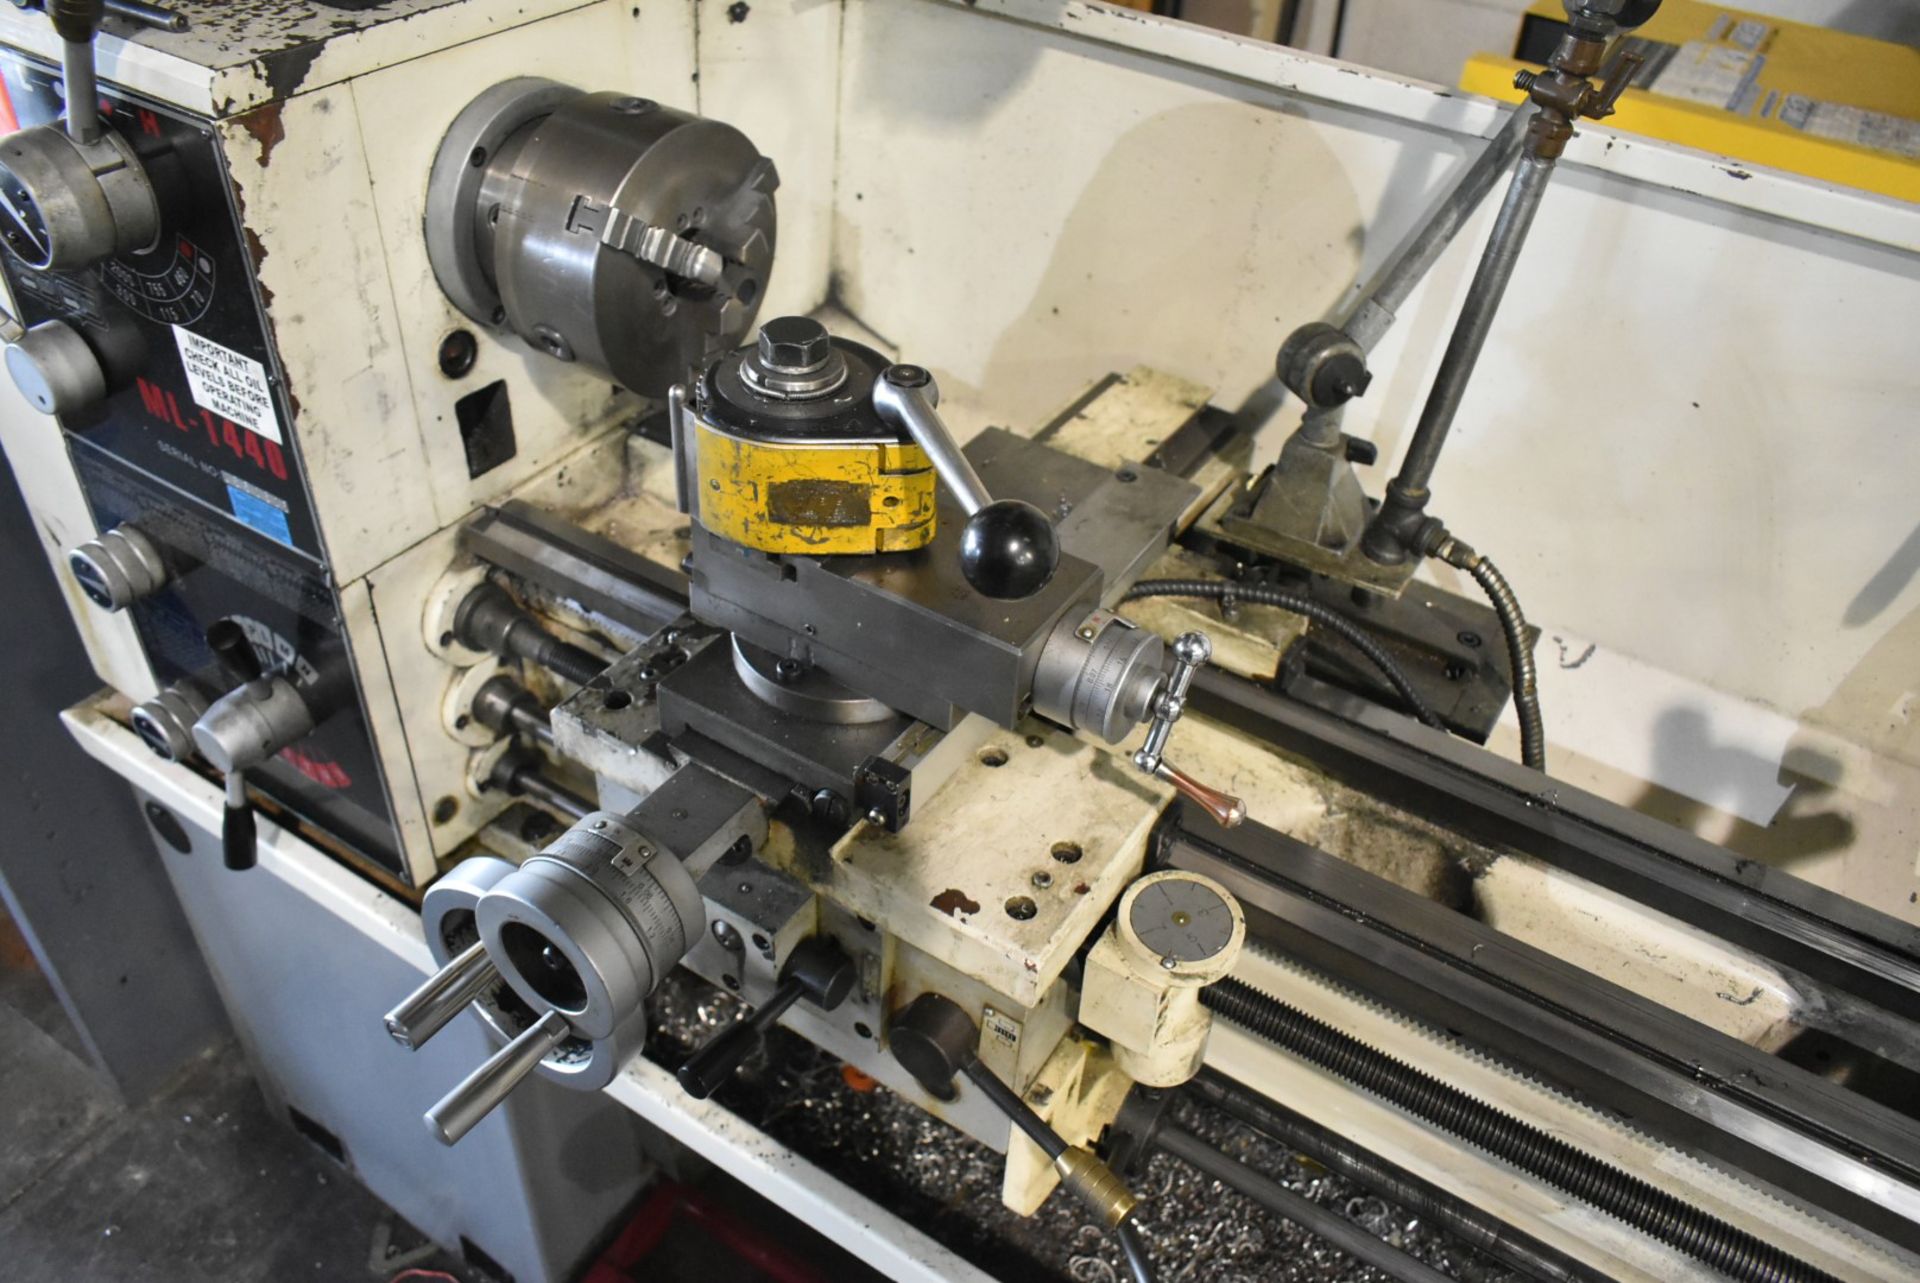 MODERN ML1440 GAP BED TOOLROOM LATHE WITH 14" SWING IN BED, 16" SWING IN THE GAP, 37" IN BETWEEN - Image 4 of 8